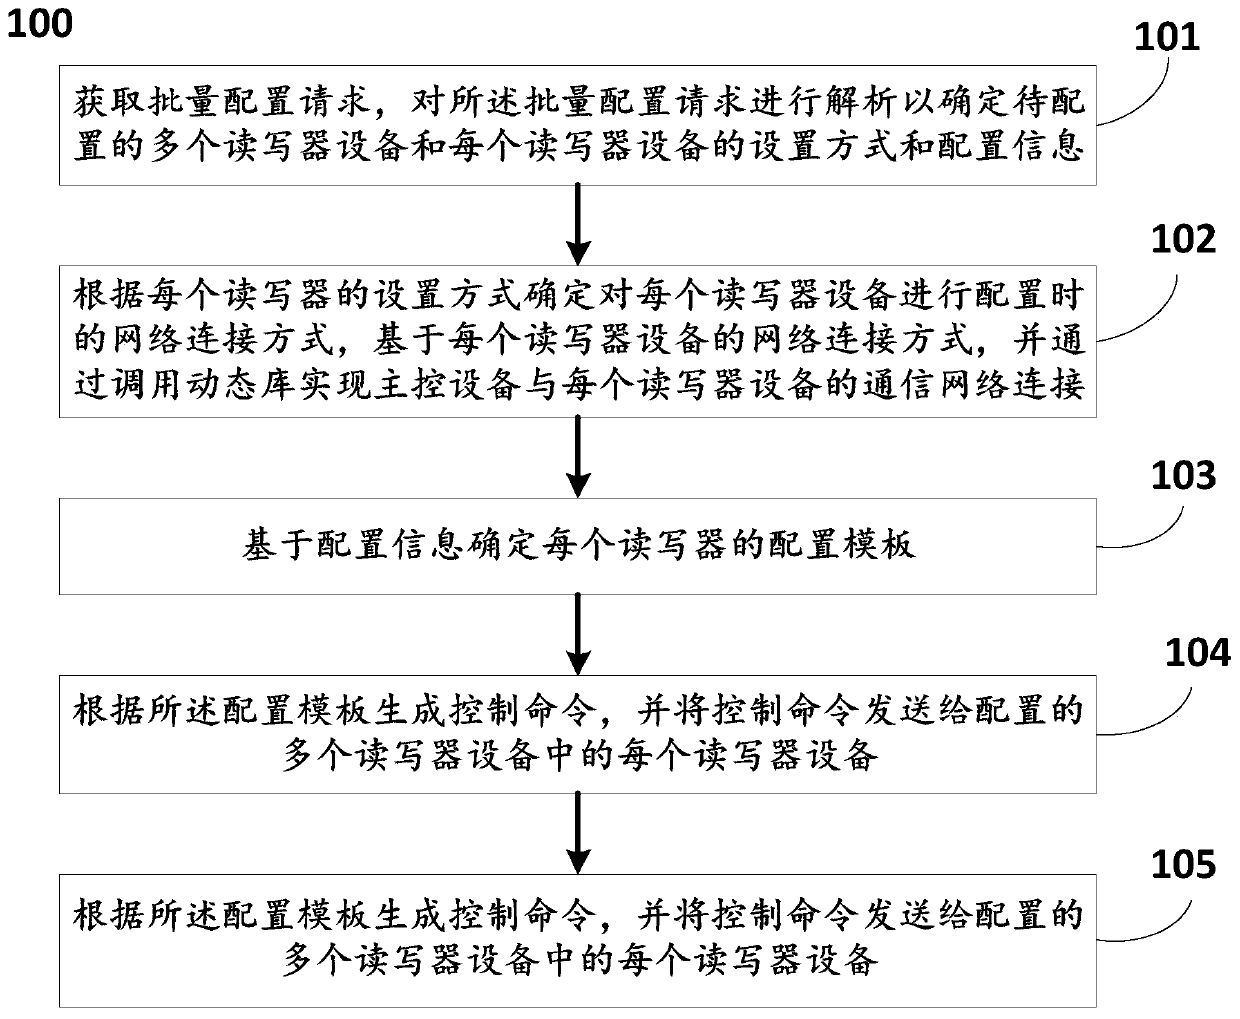 Batch configuration method and system for electronic identification reader-writer equipment of motor vehicle